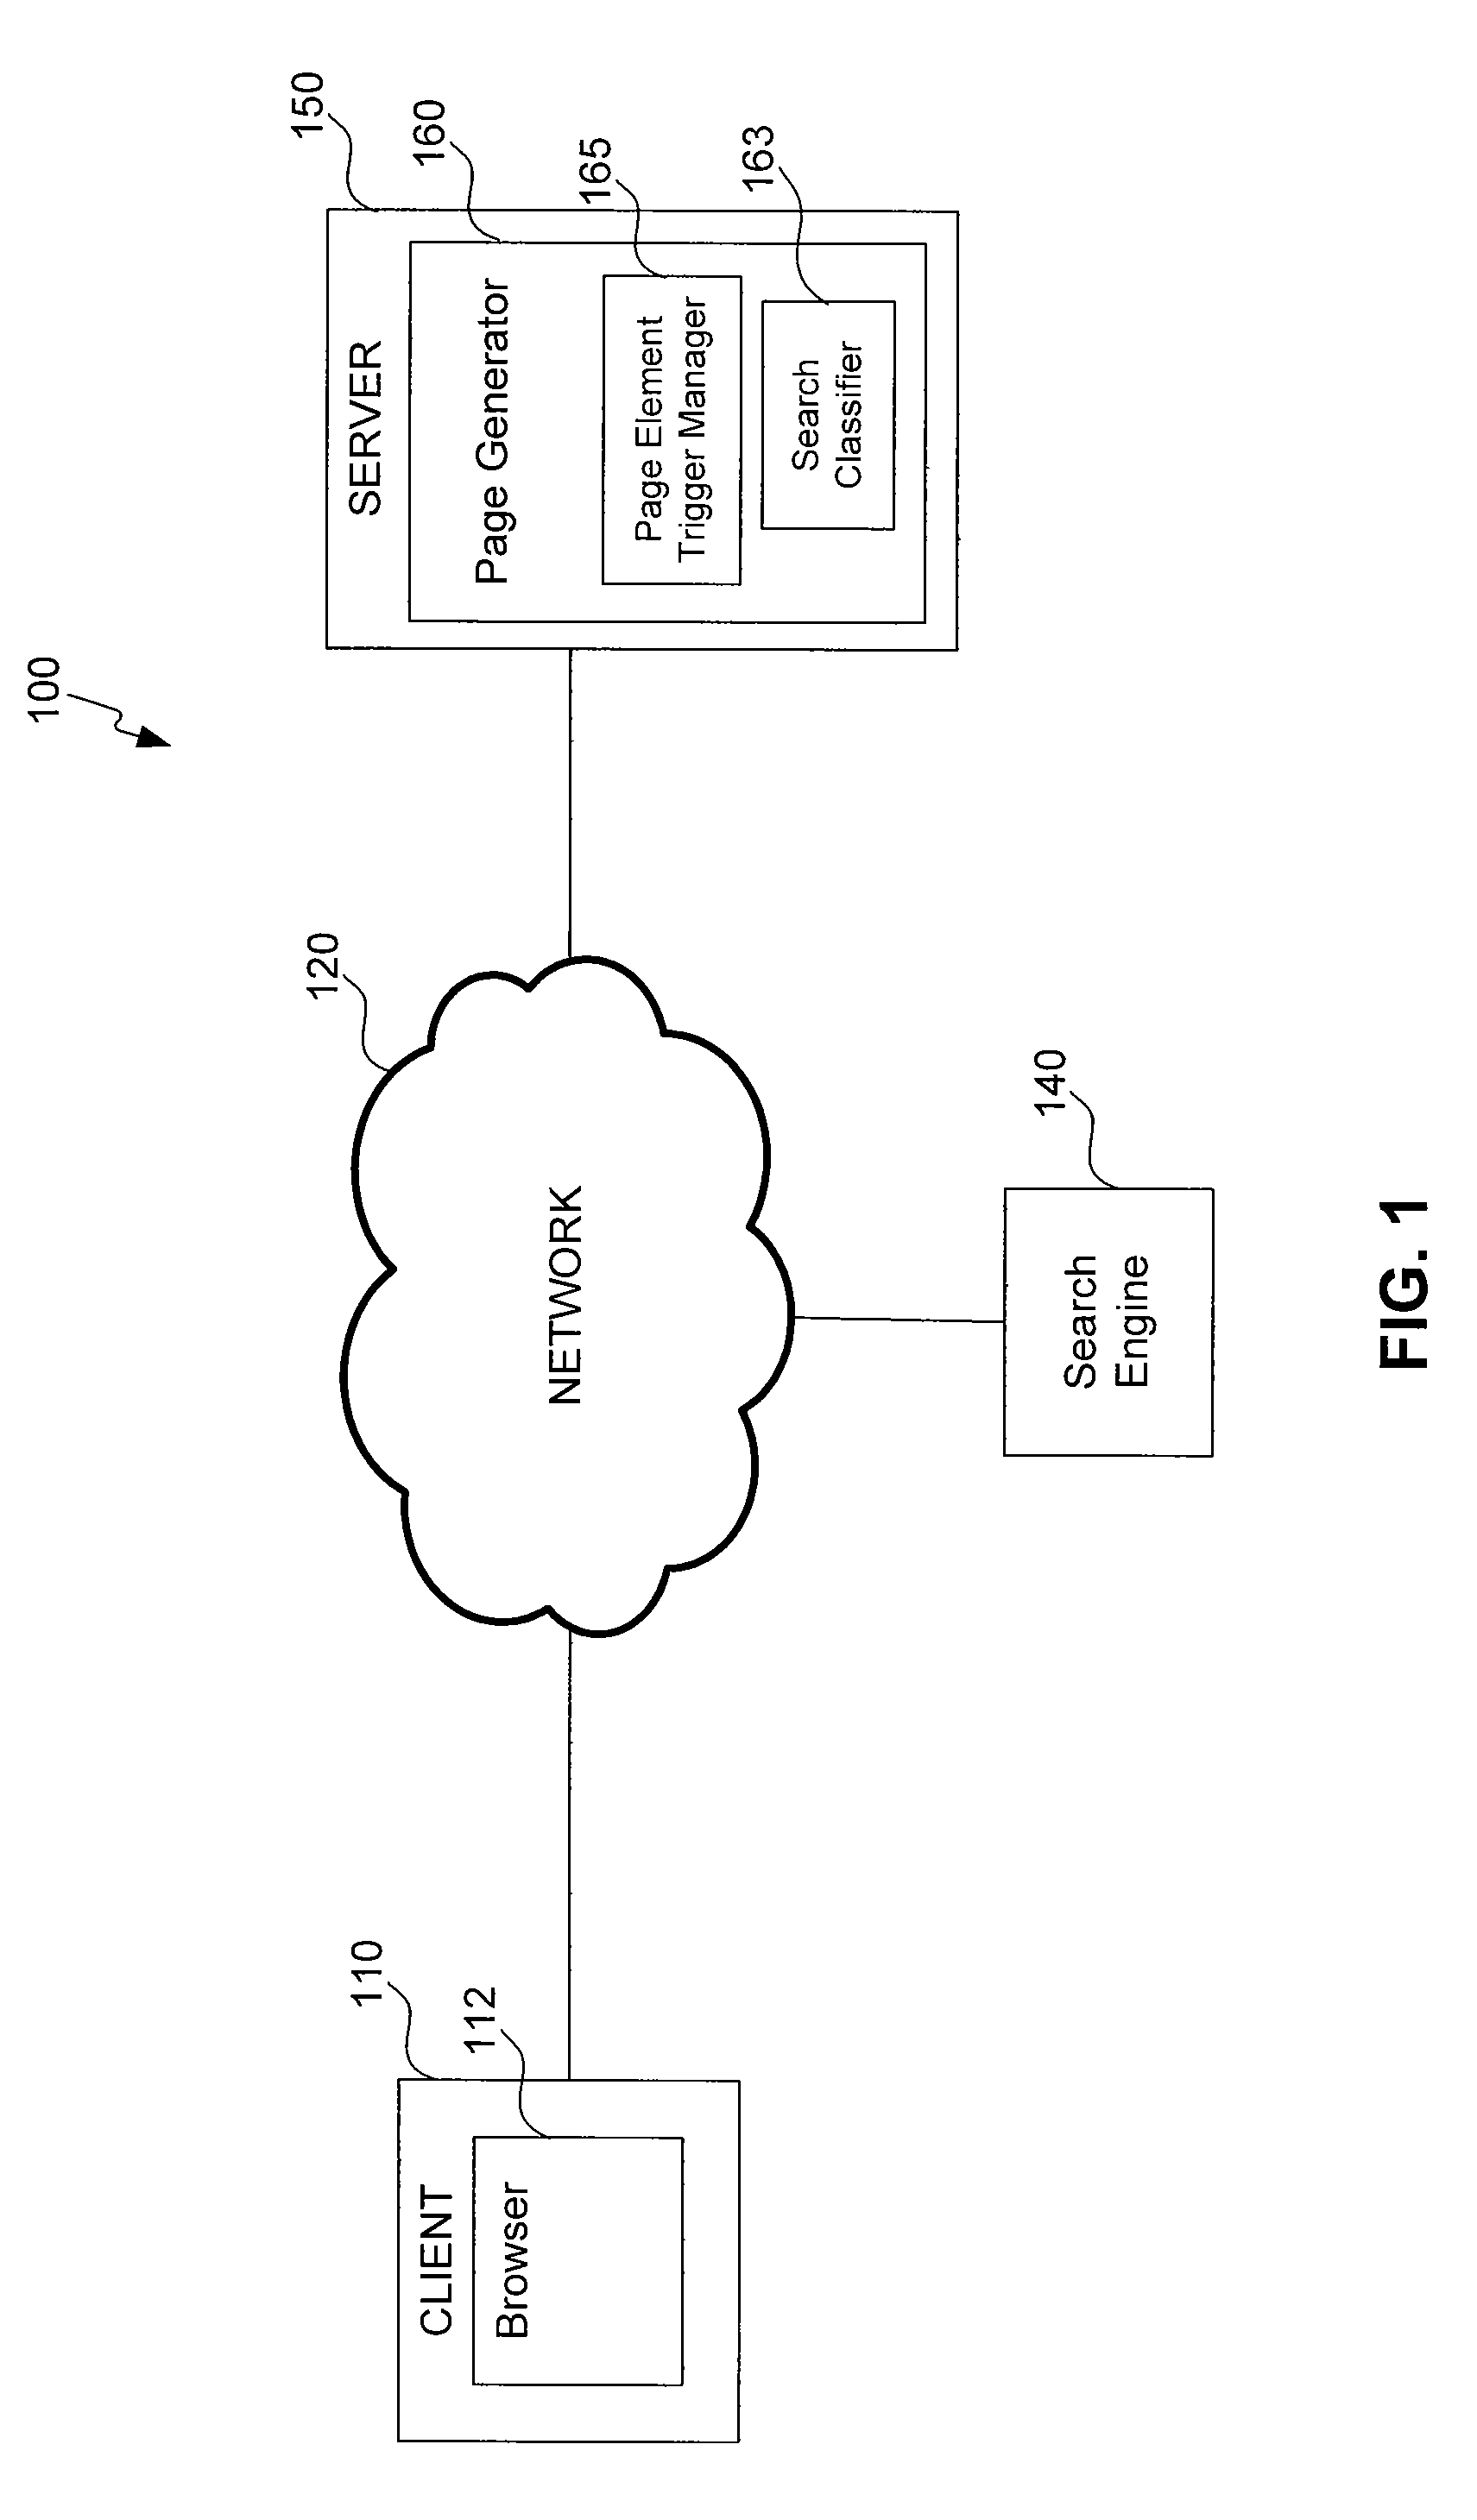 Methods and Systems for Classifying Search Results to Determine Page Elements